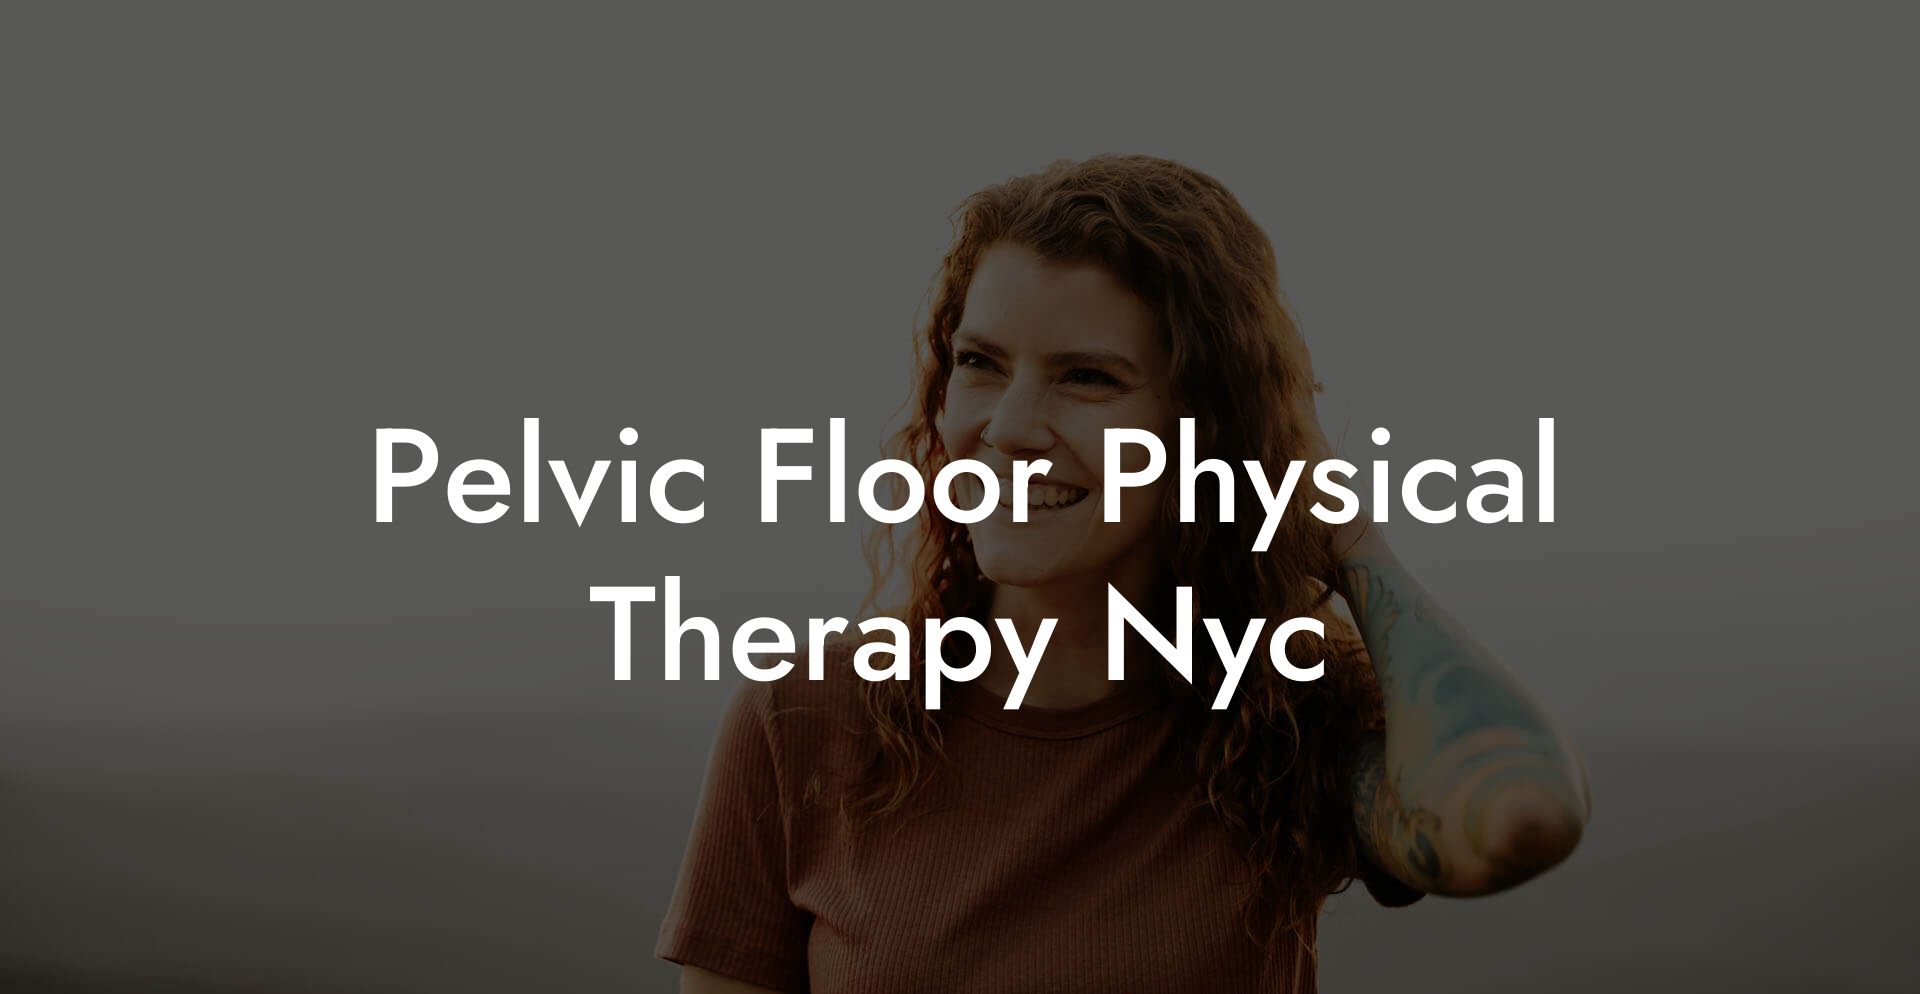 Pelvic Floor Physical Therapy Nyc